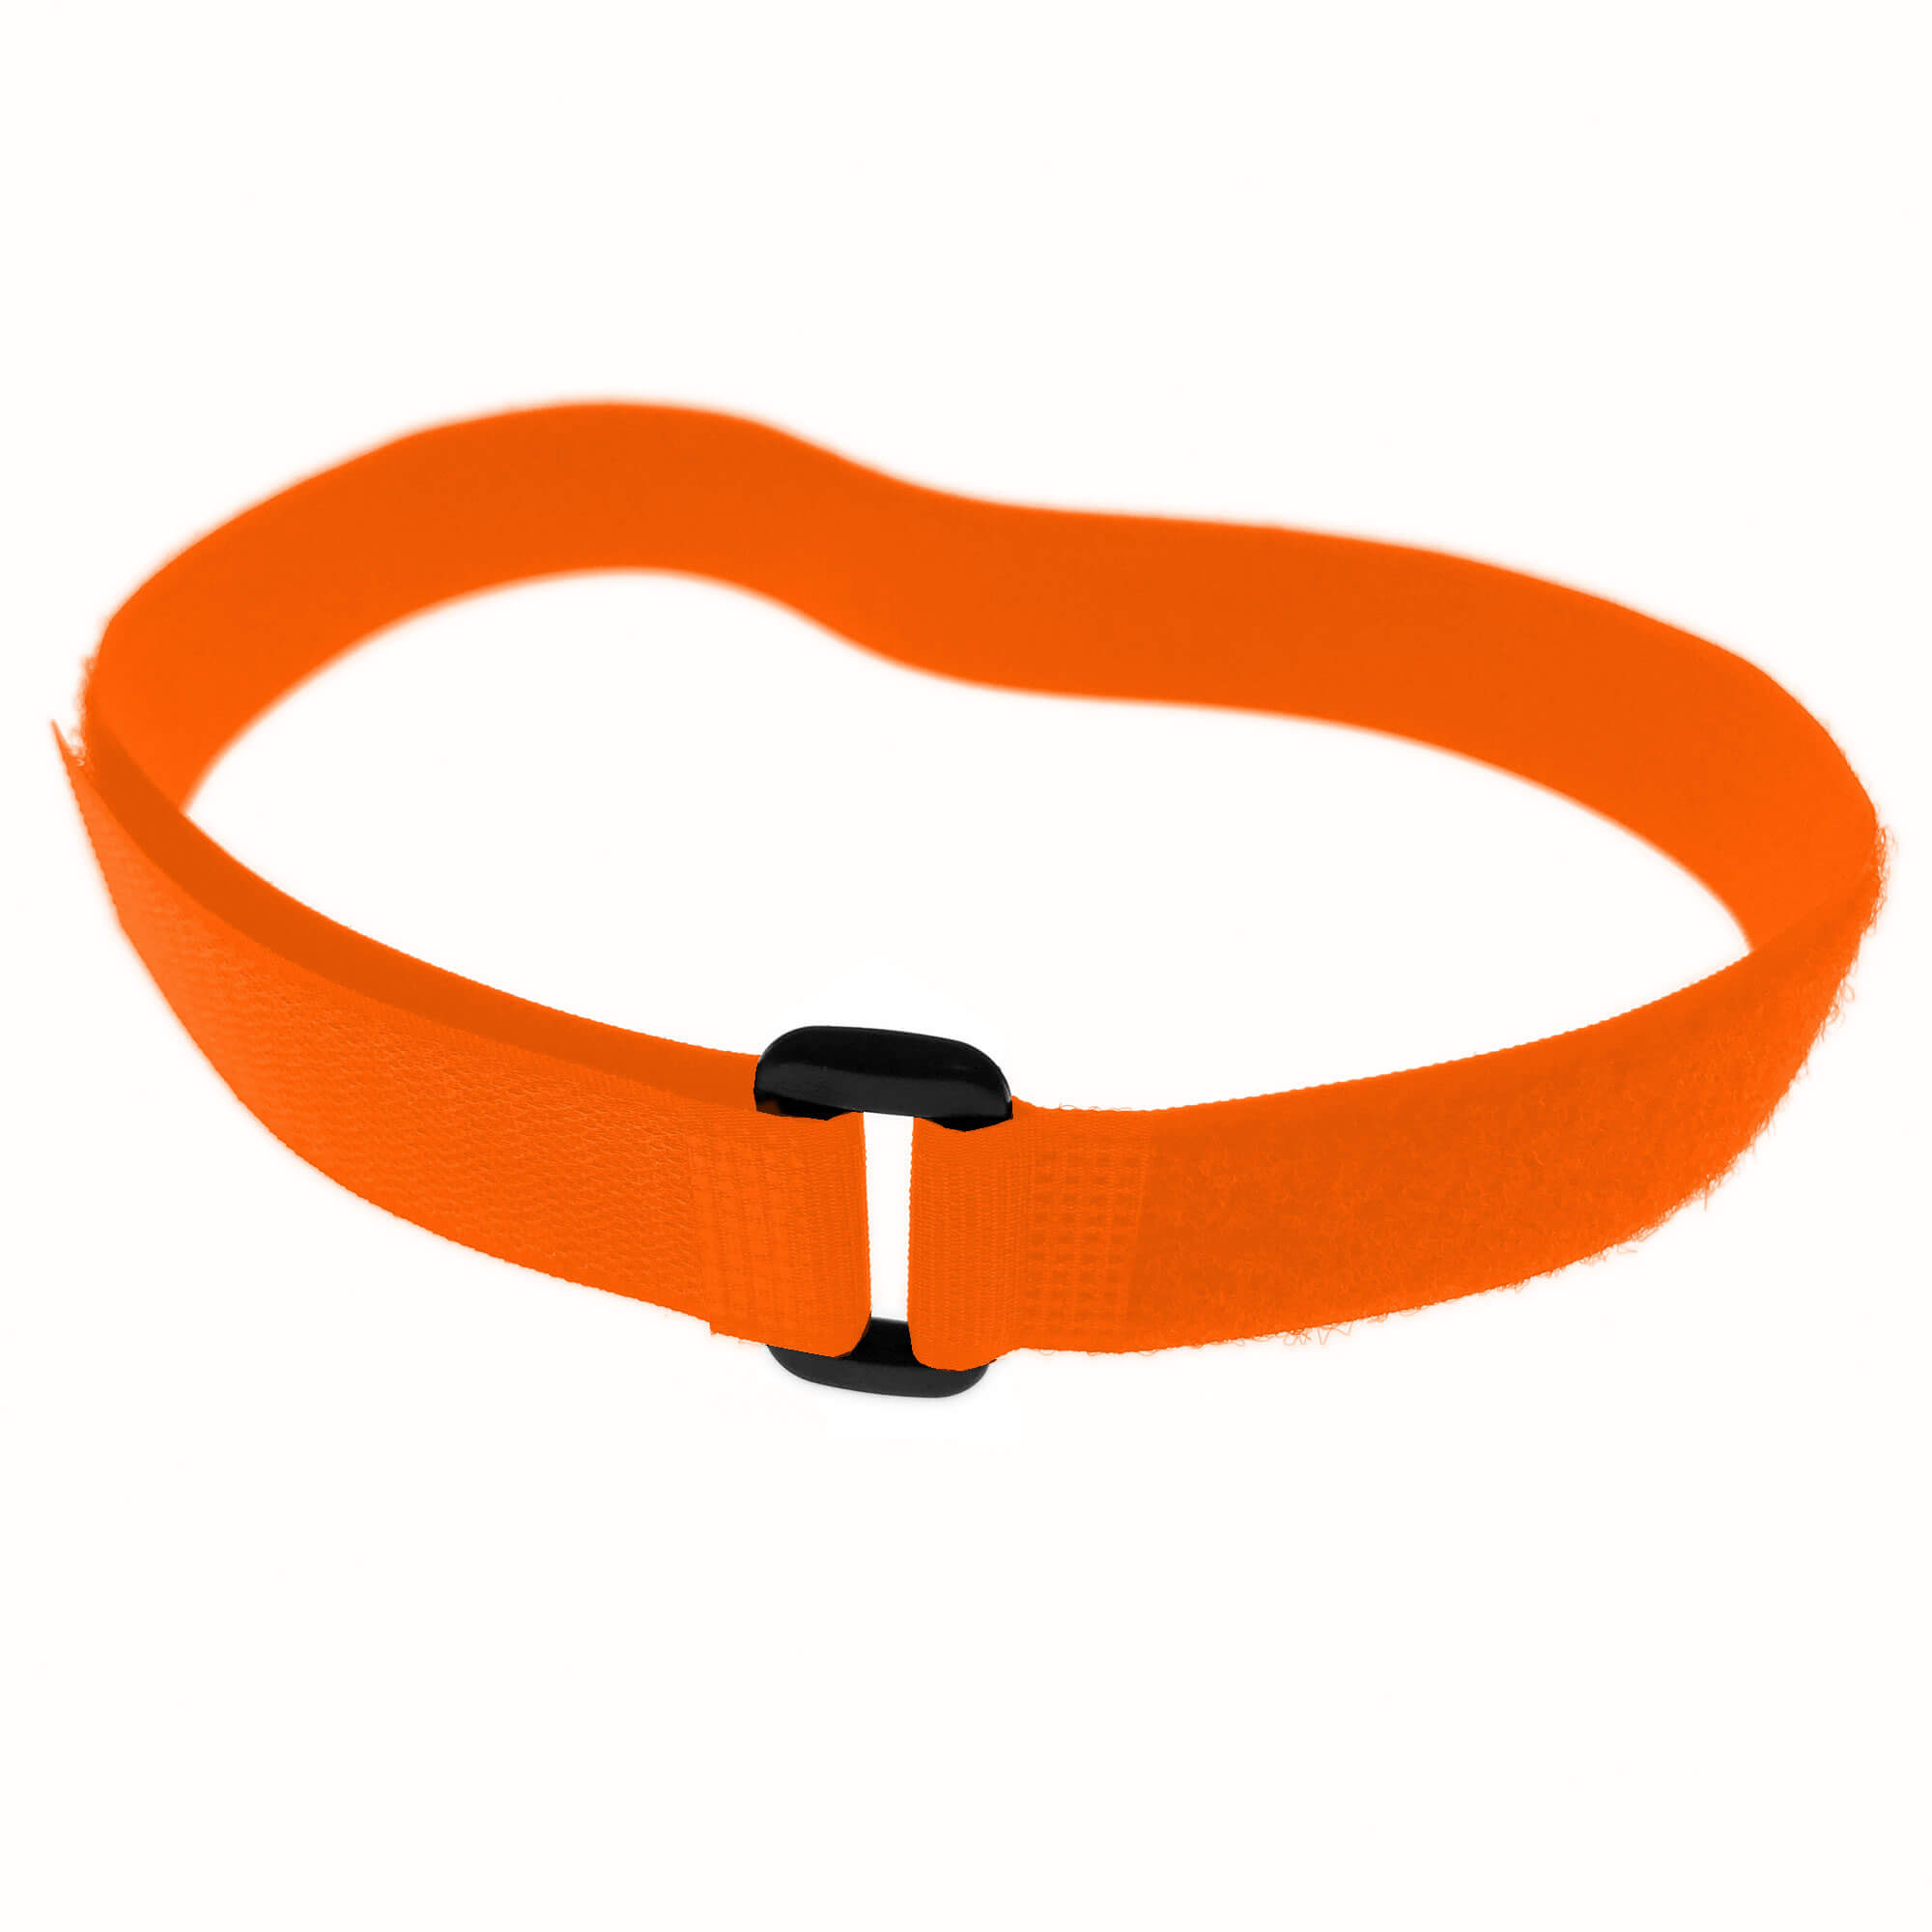 25mm Wide Adjustable Ring Strap with VELCRO® Brand Tape